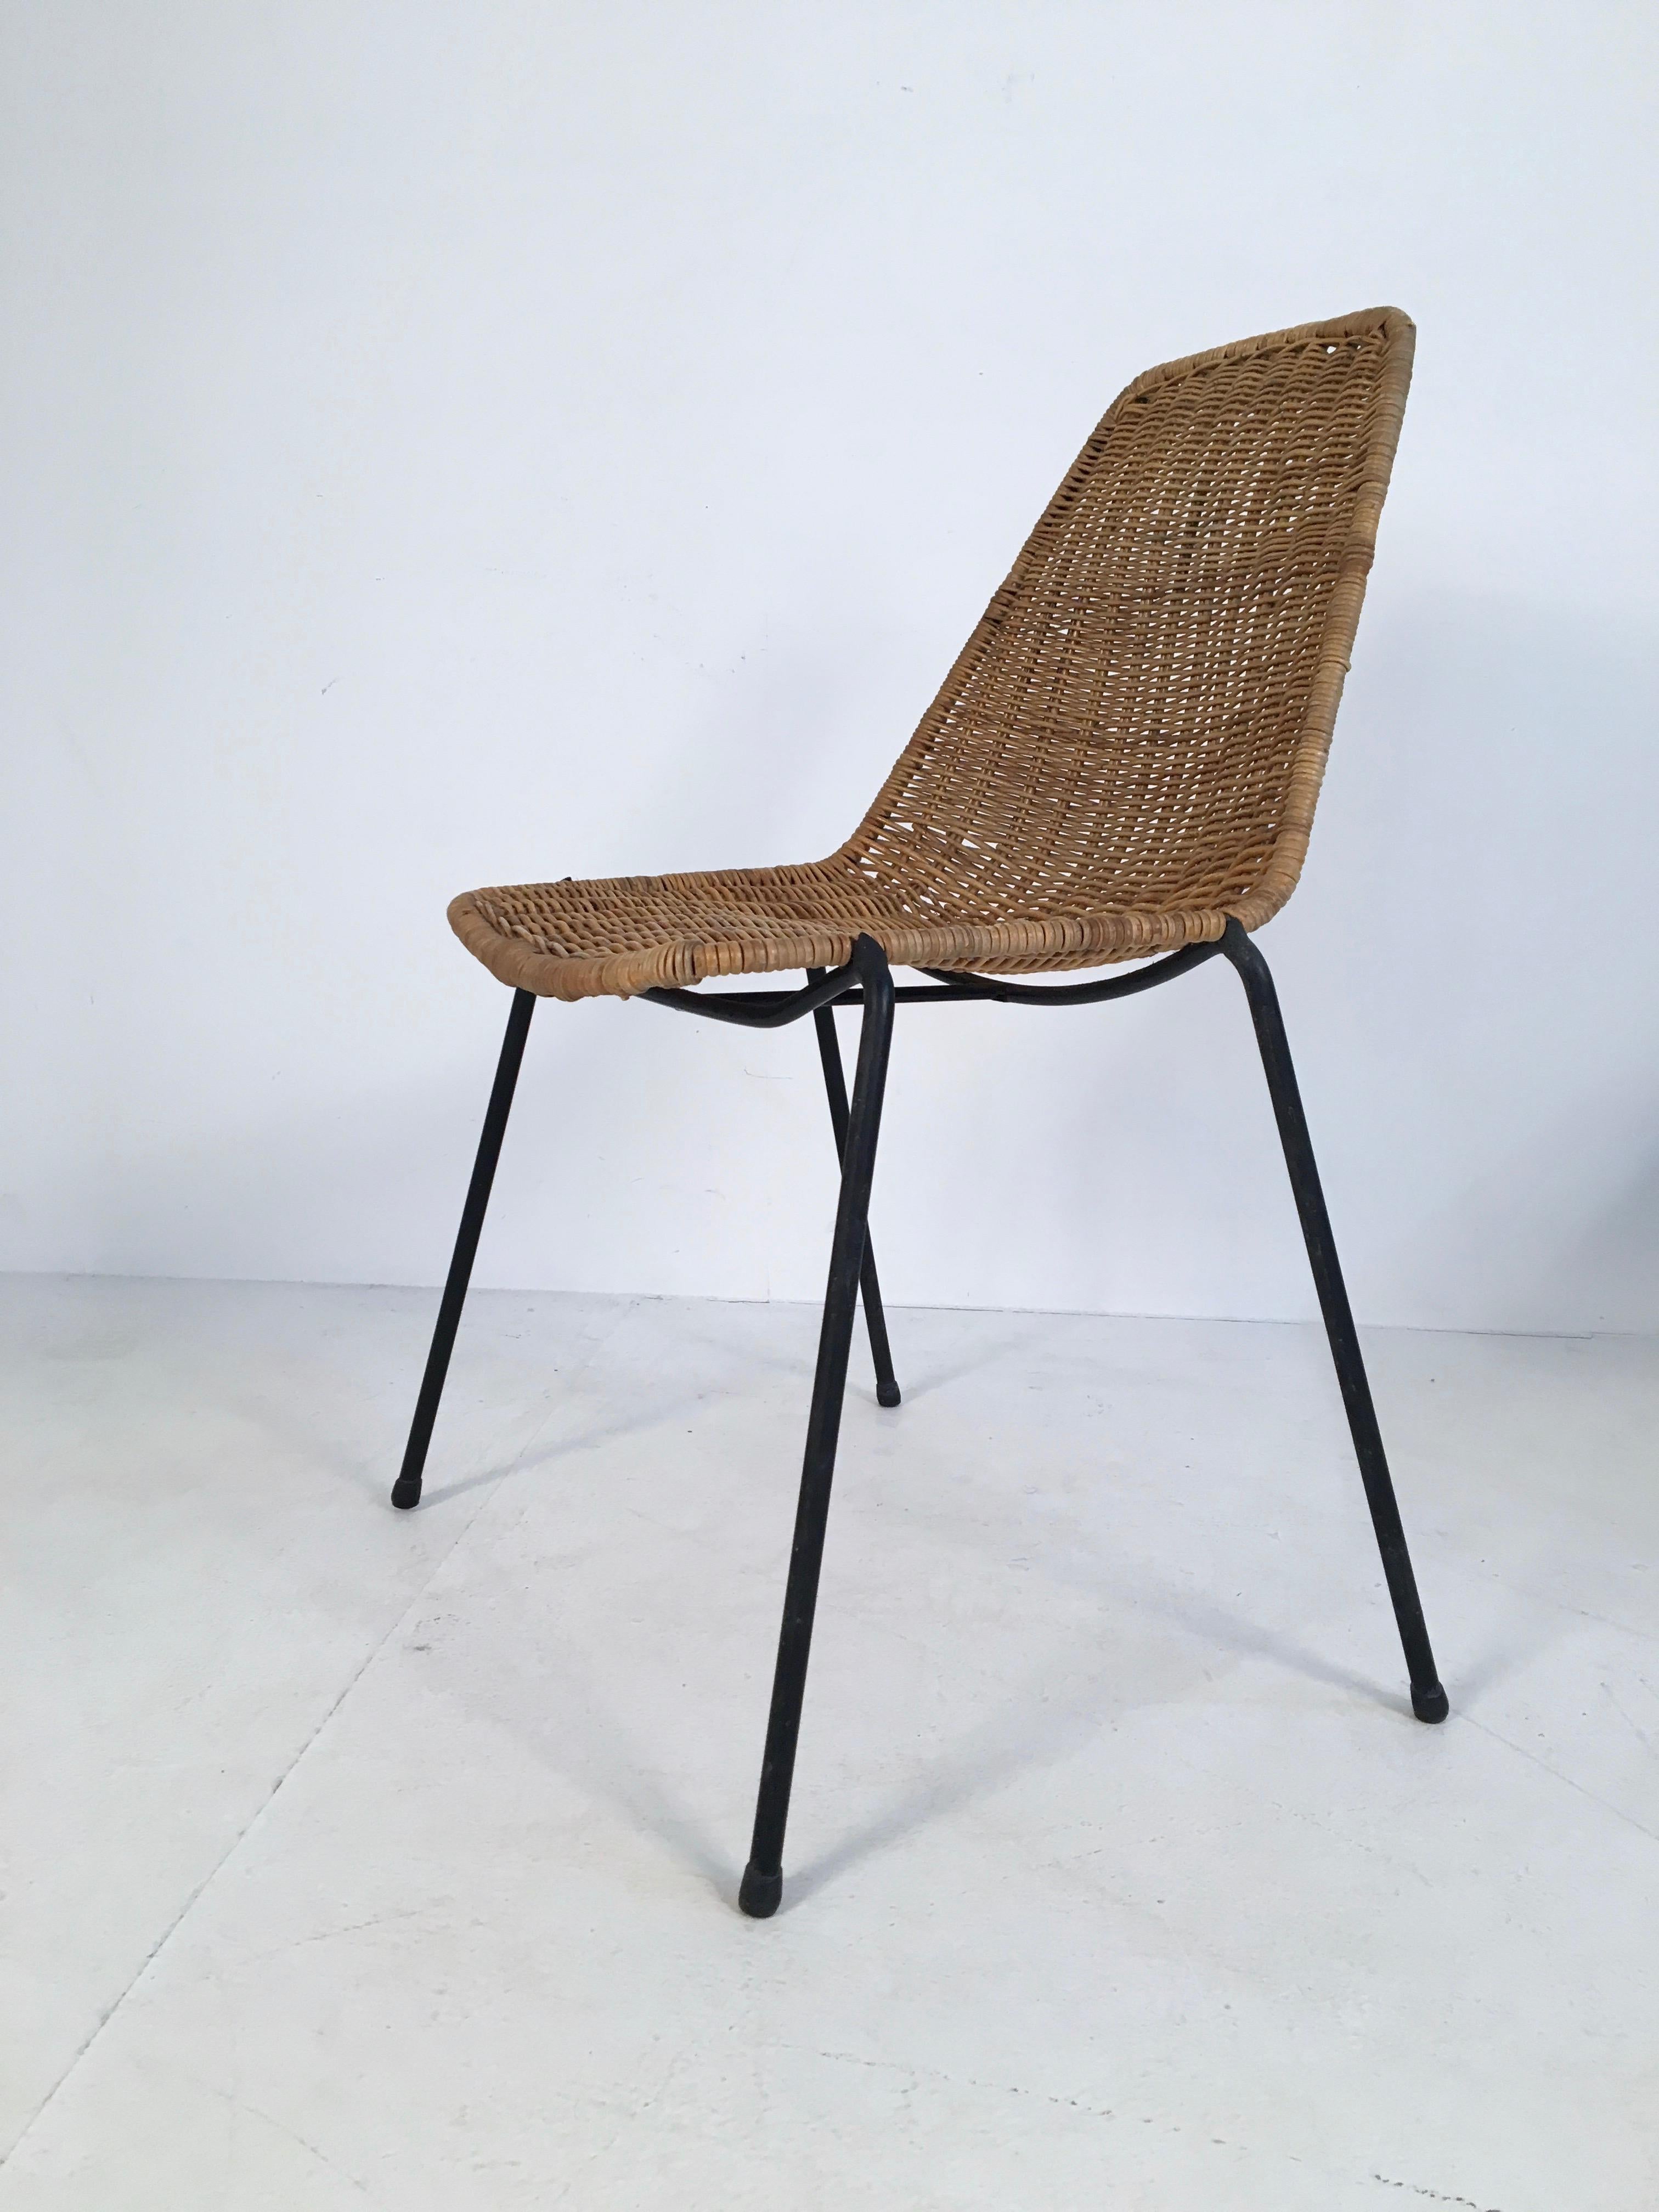 Woven 2 Midcentury Wicker Chairs by Campo & Graffi for Home Torino, Italy, circa 1950 For Sale